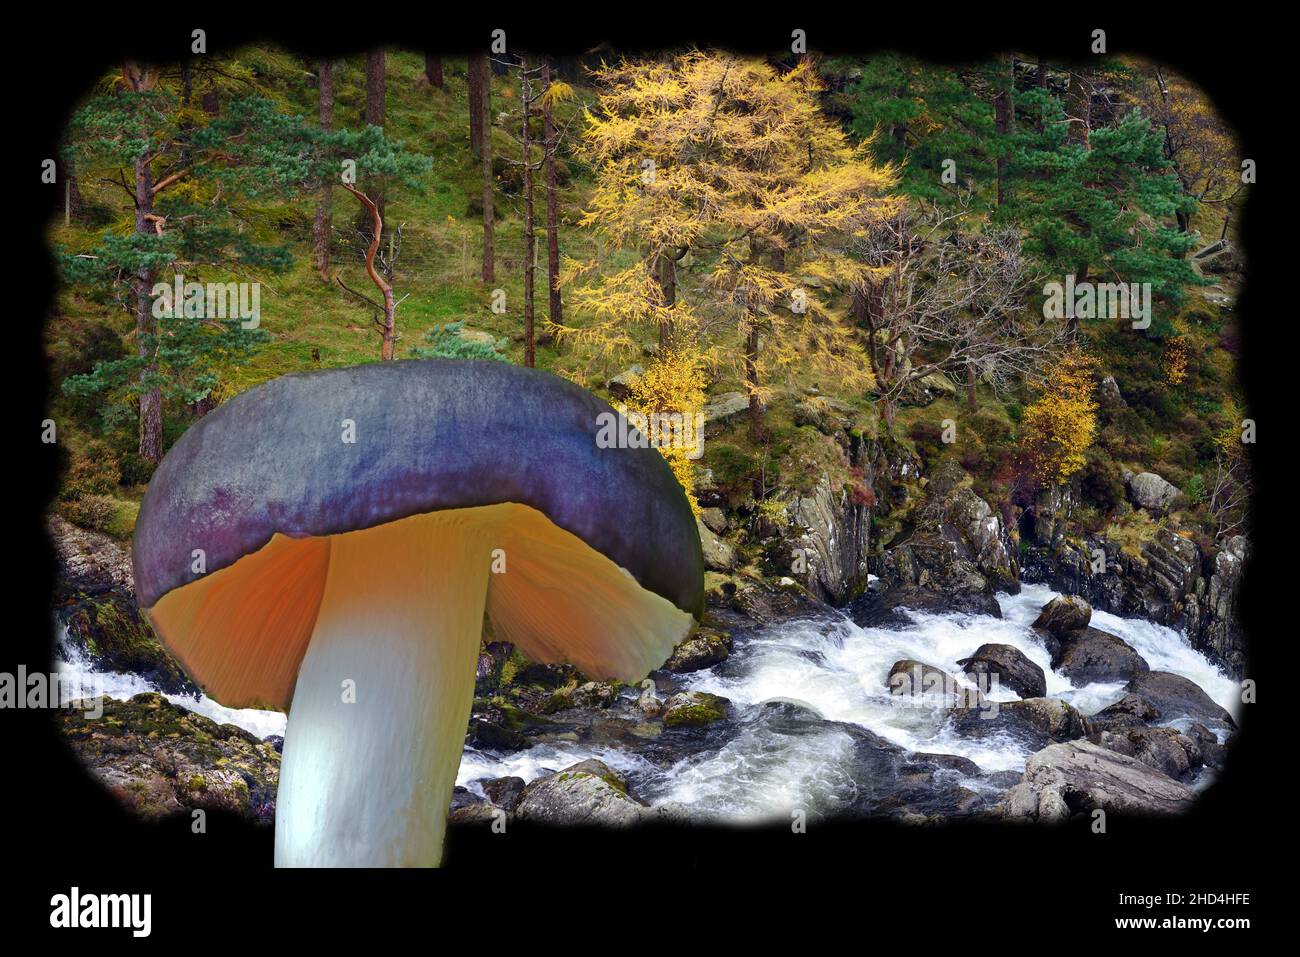 Russula turci is a common fungus found in conifer forests as seen in the background. Stock Photo